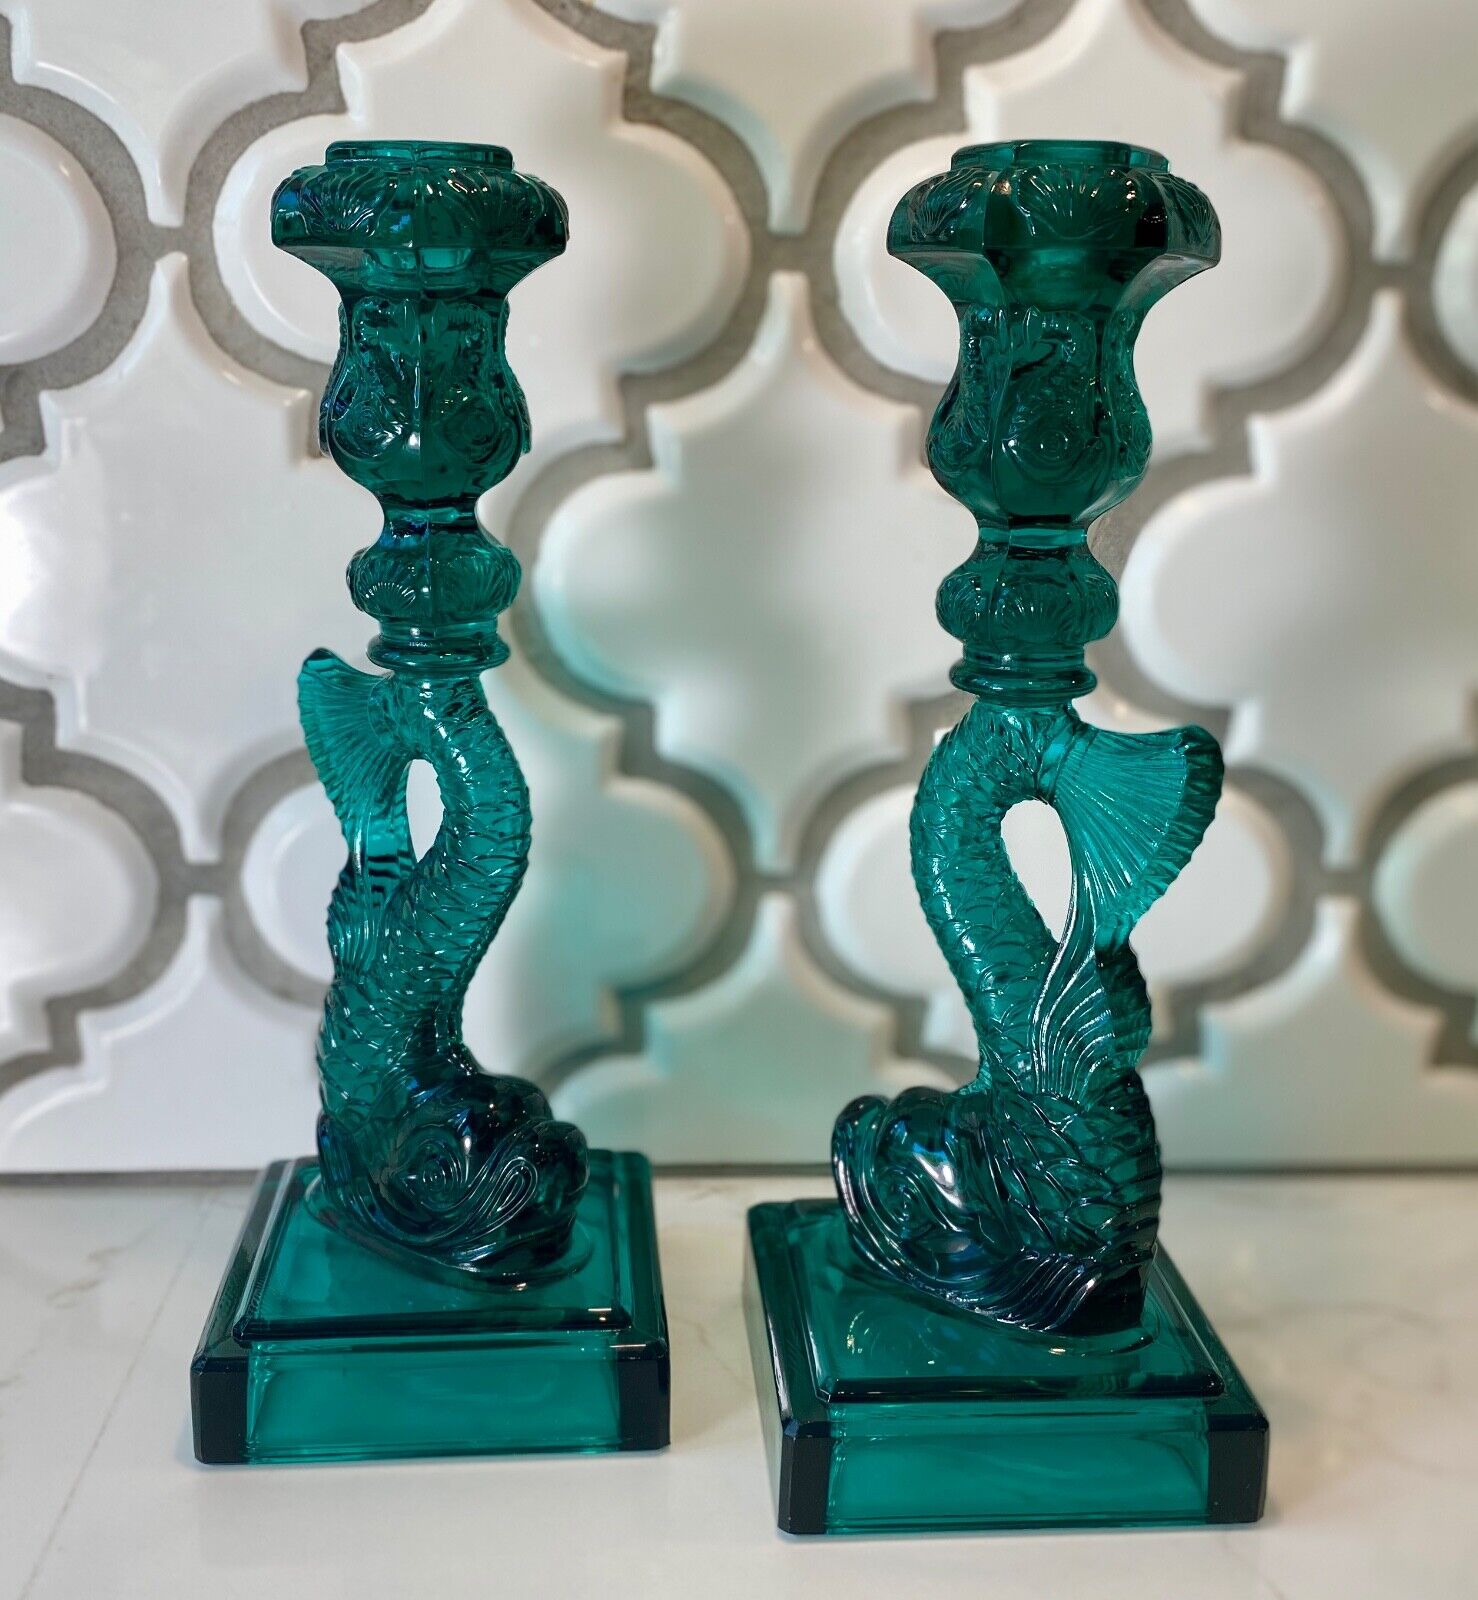 PAIR Imperial MMA Koi Fish Glass Candlesticks Candle Holders Teal Green VINTAGE